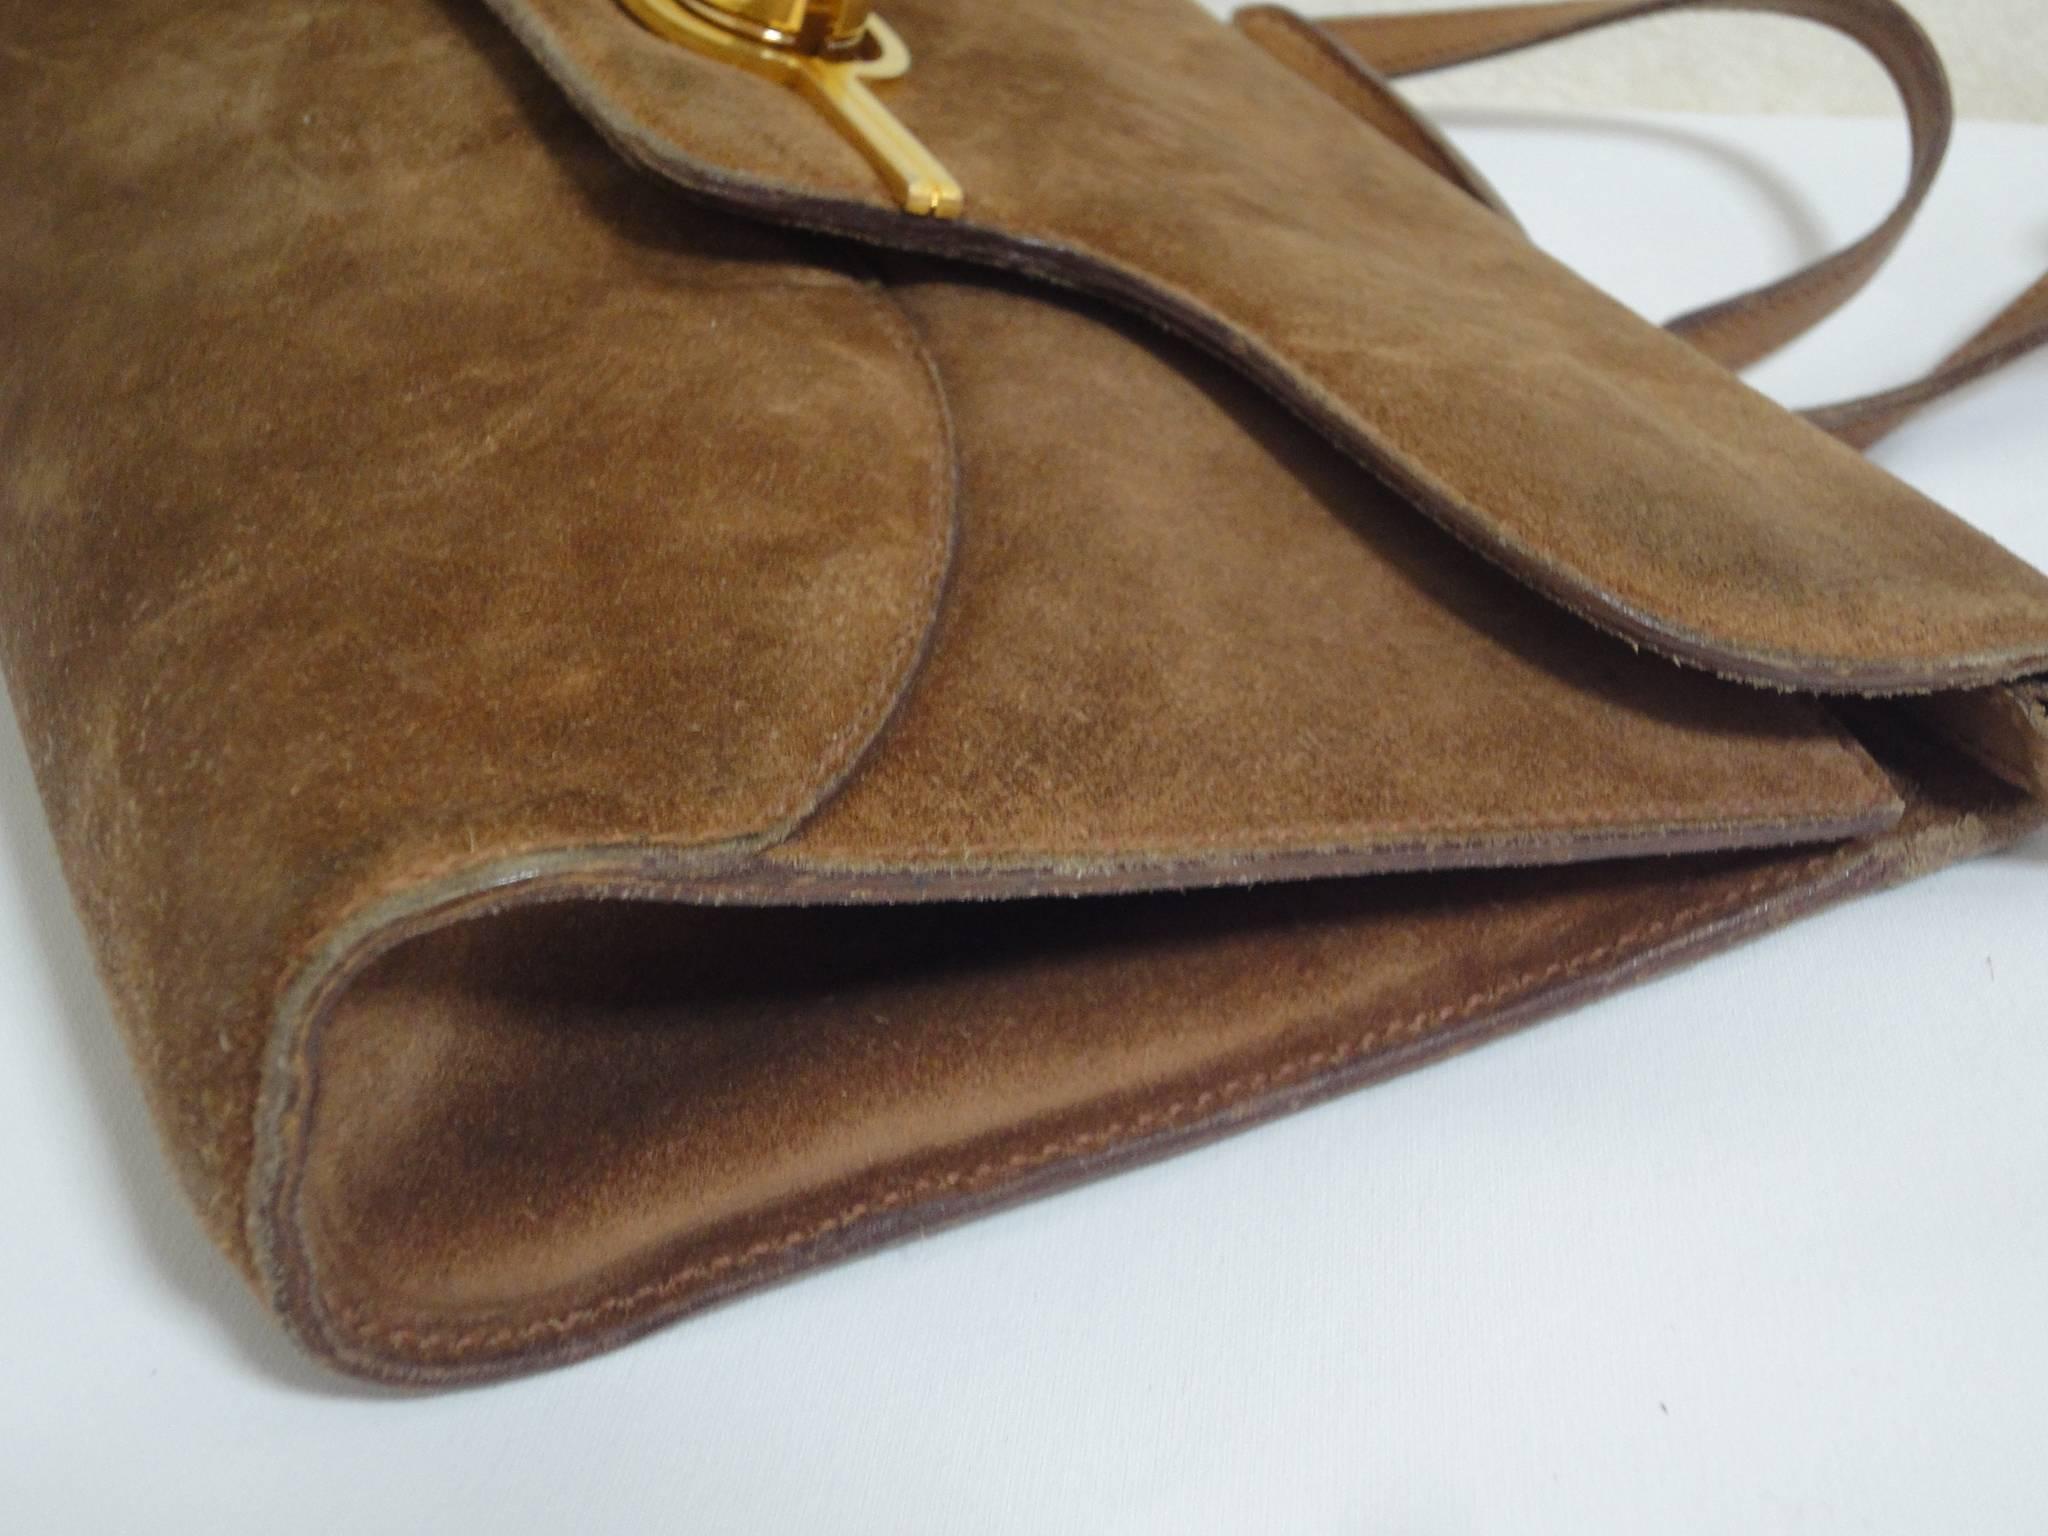 Women's Vintage Gucci tanned brown suede leather shoulder clutch bag with golden logo. 